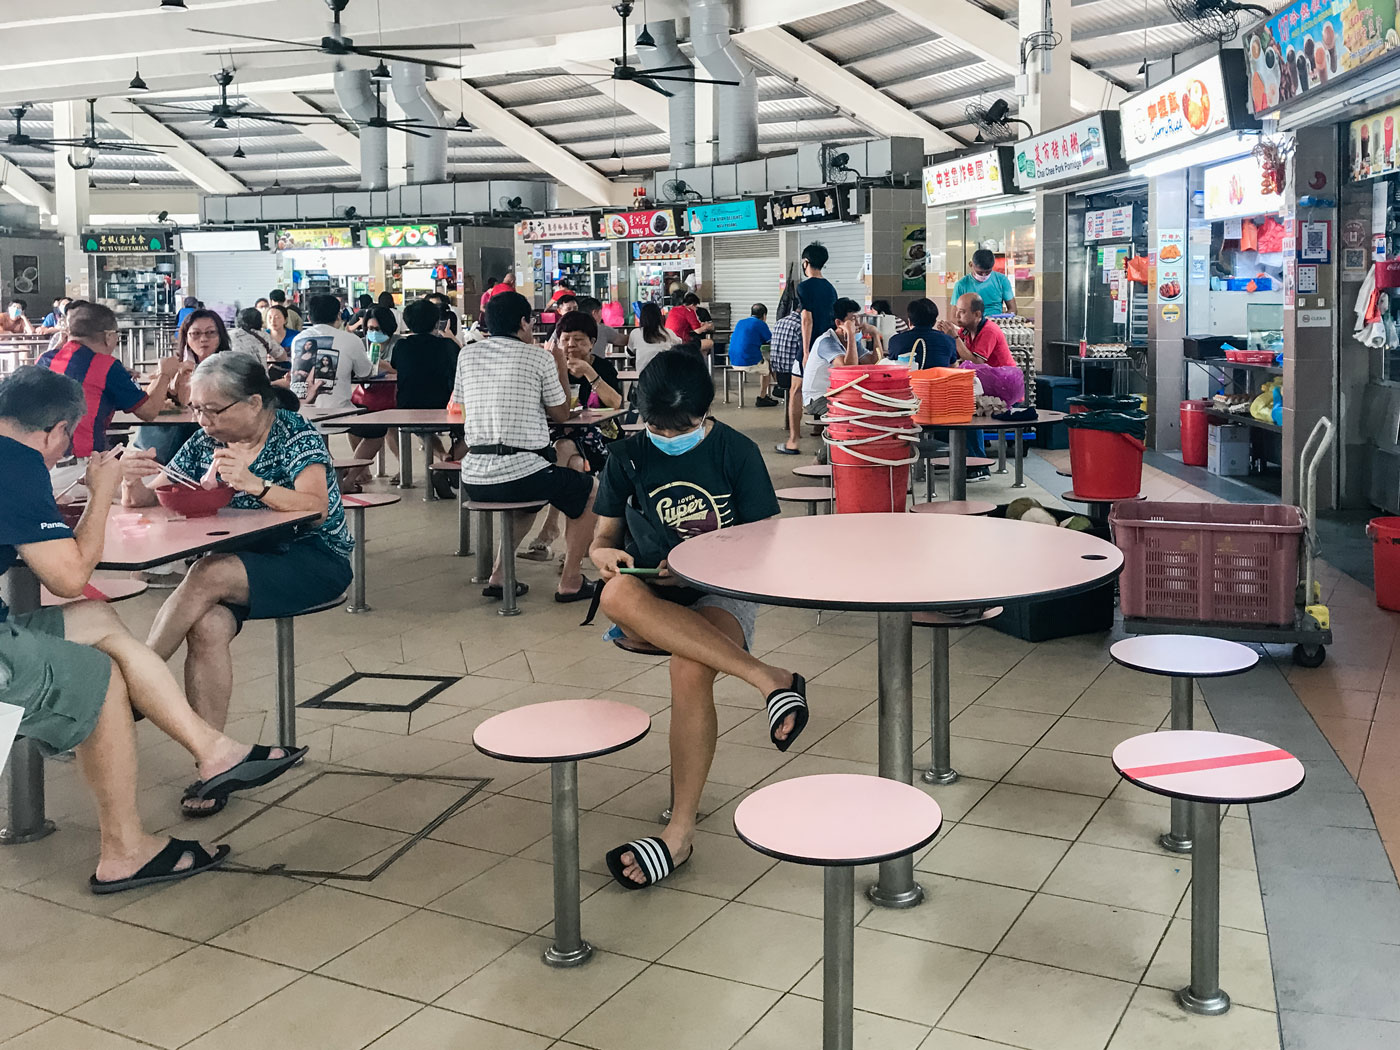 The hustle and bustle of a Hawker Centre.